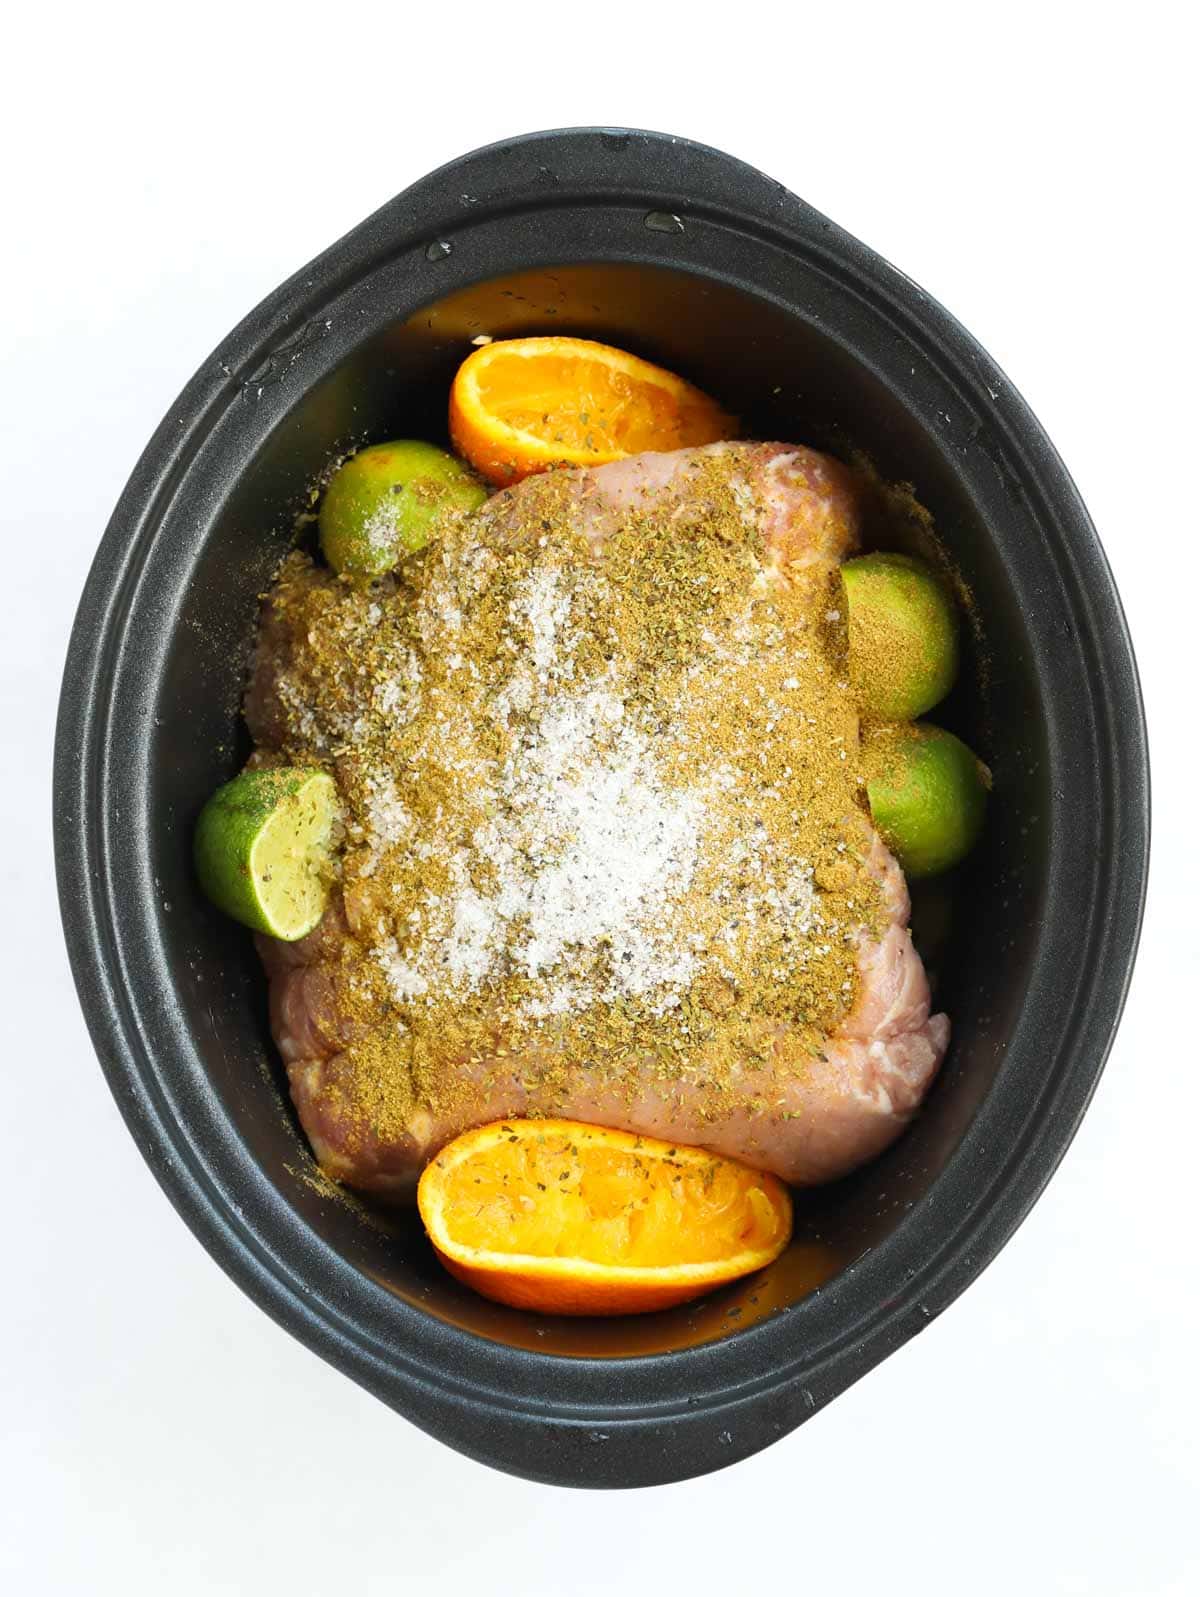 How to make Pork Carnitas in the slow cooker